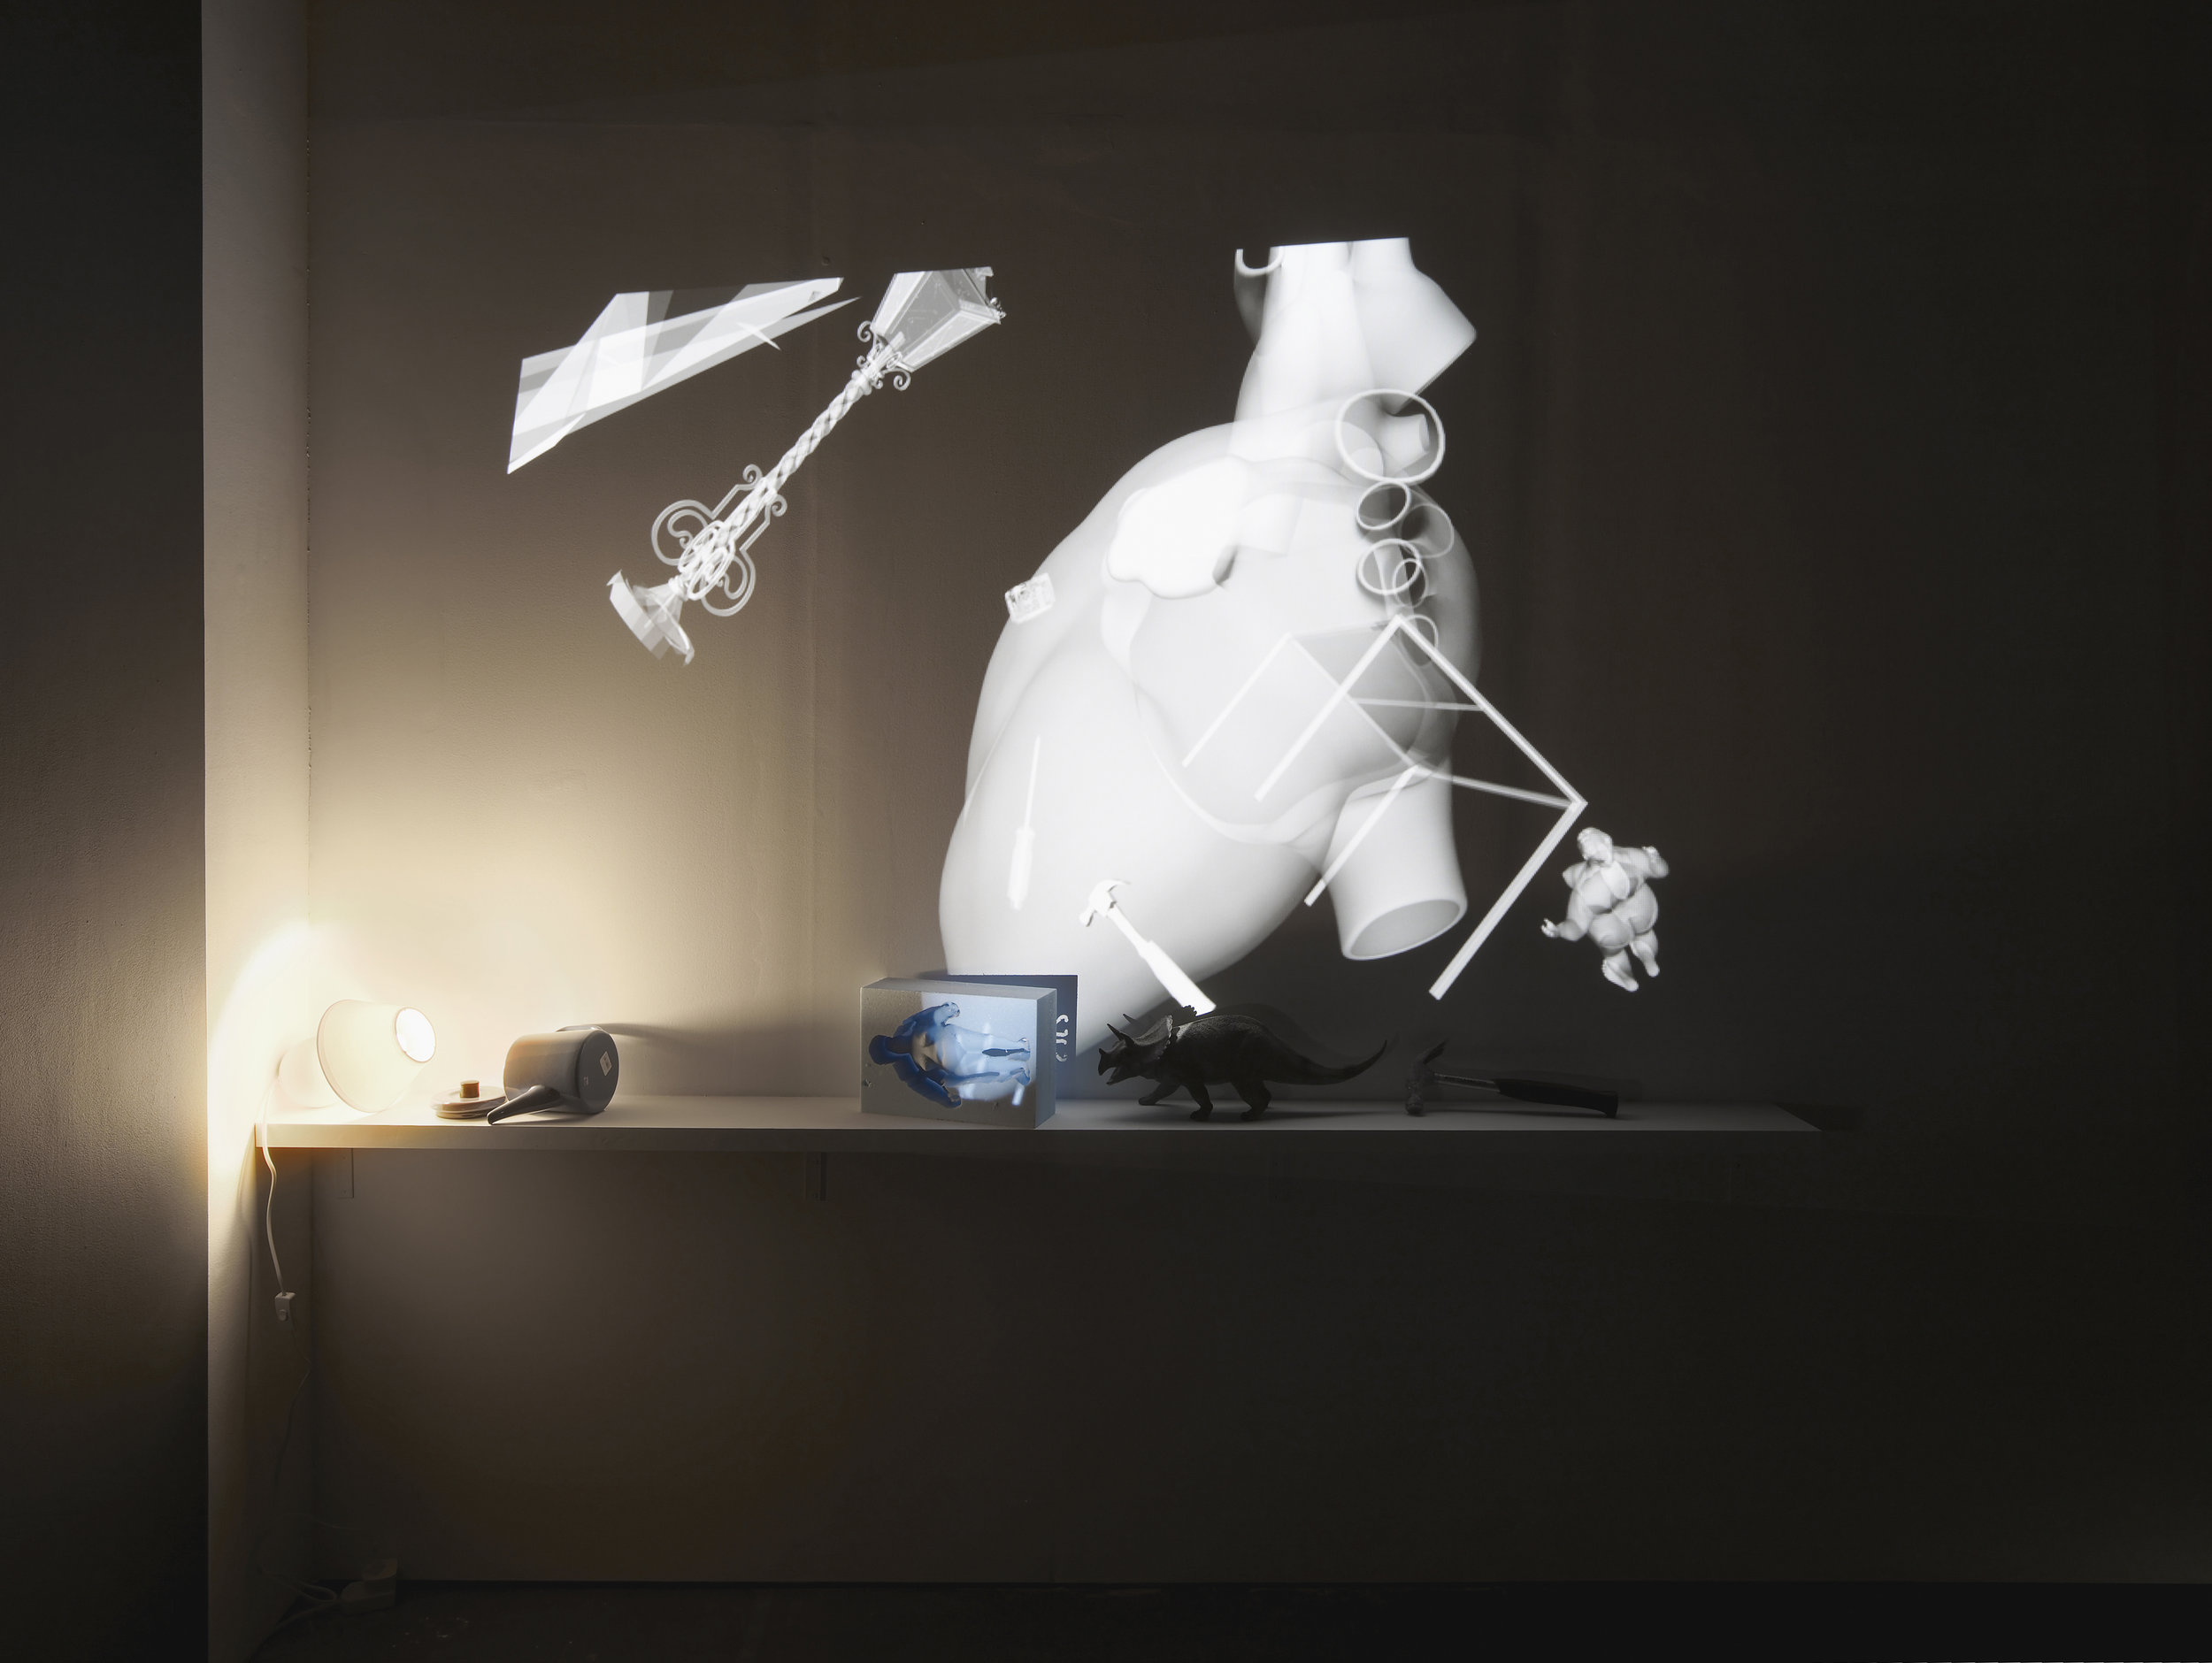     Christina Mackie  Fall Force (Installation)  2012/2017  Stereo vision projection, blu-ray disc, 3D glasses, 3D projector, sofa, teapot, hammer, plastic dinosaur, foam woman and lamp  Dimensions variable 